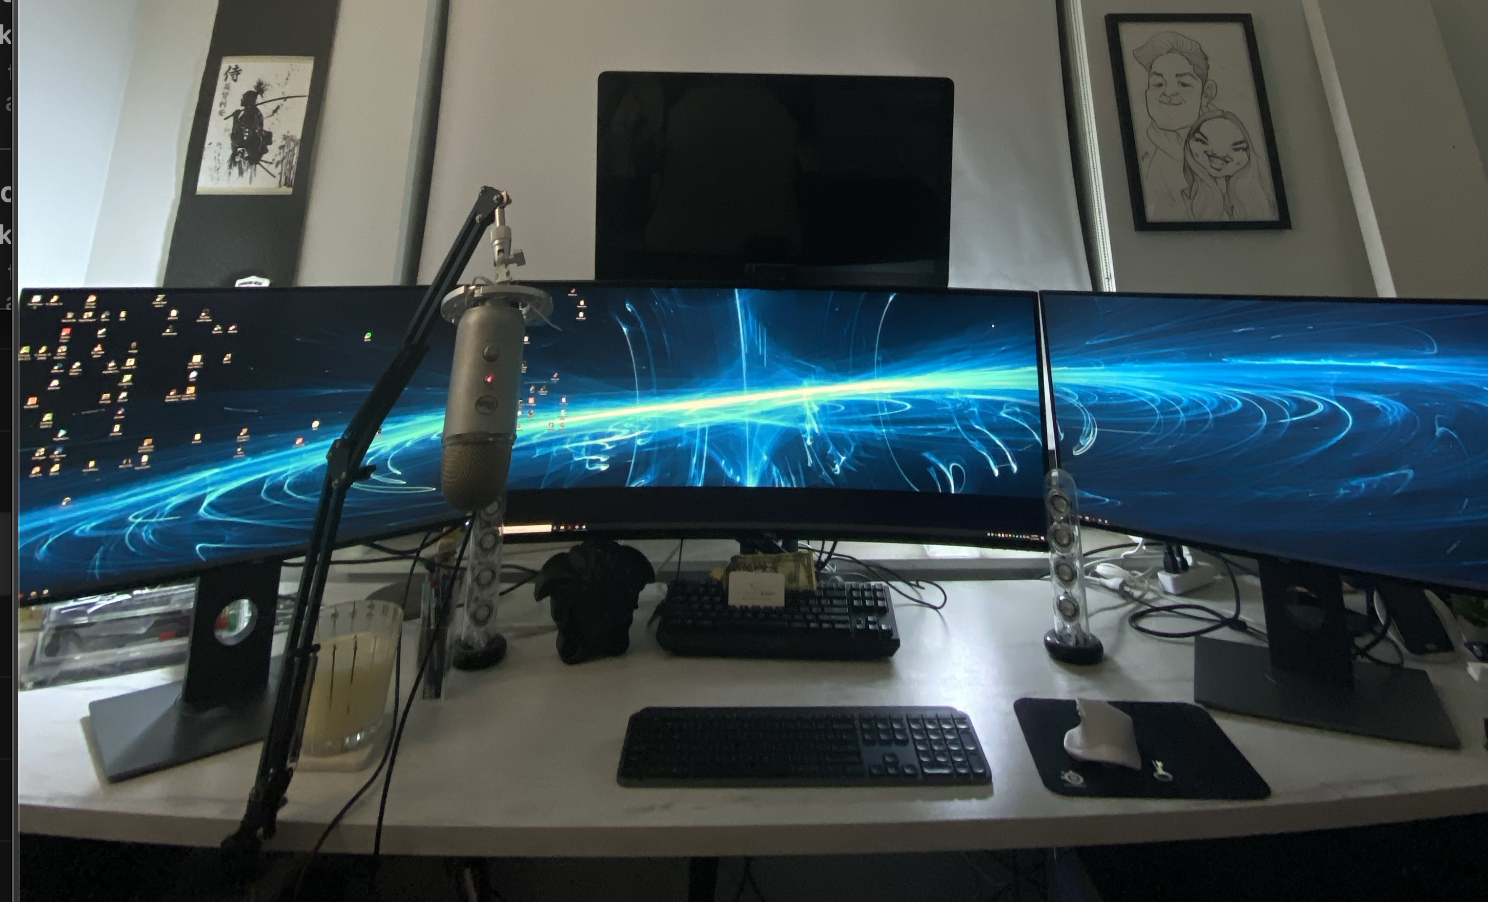 While more monitors may not equal more productivity, its your setup have fun with it.